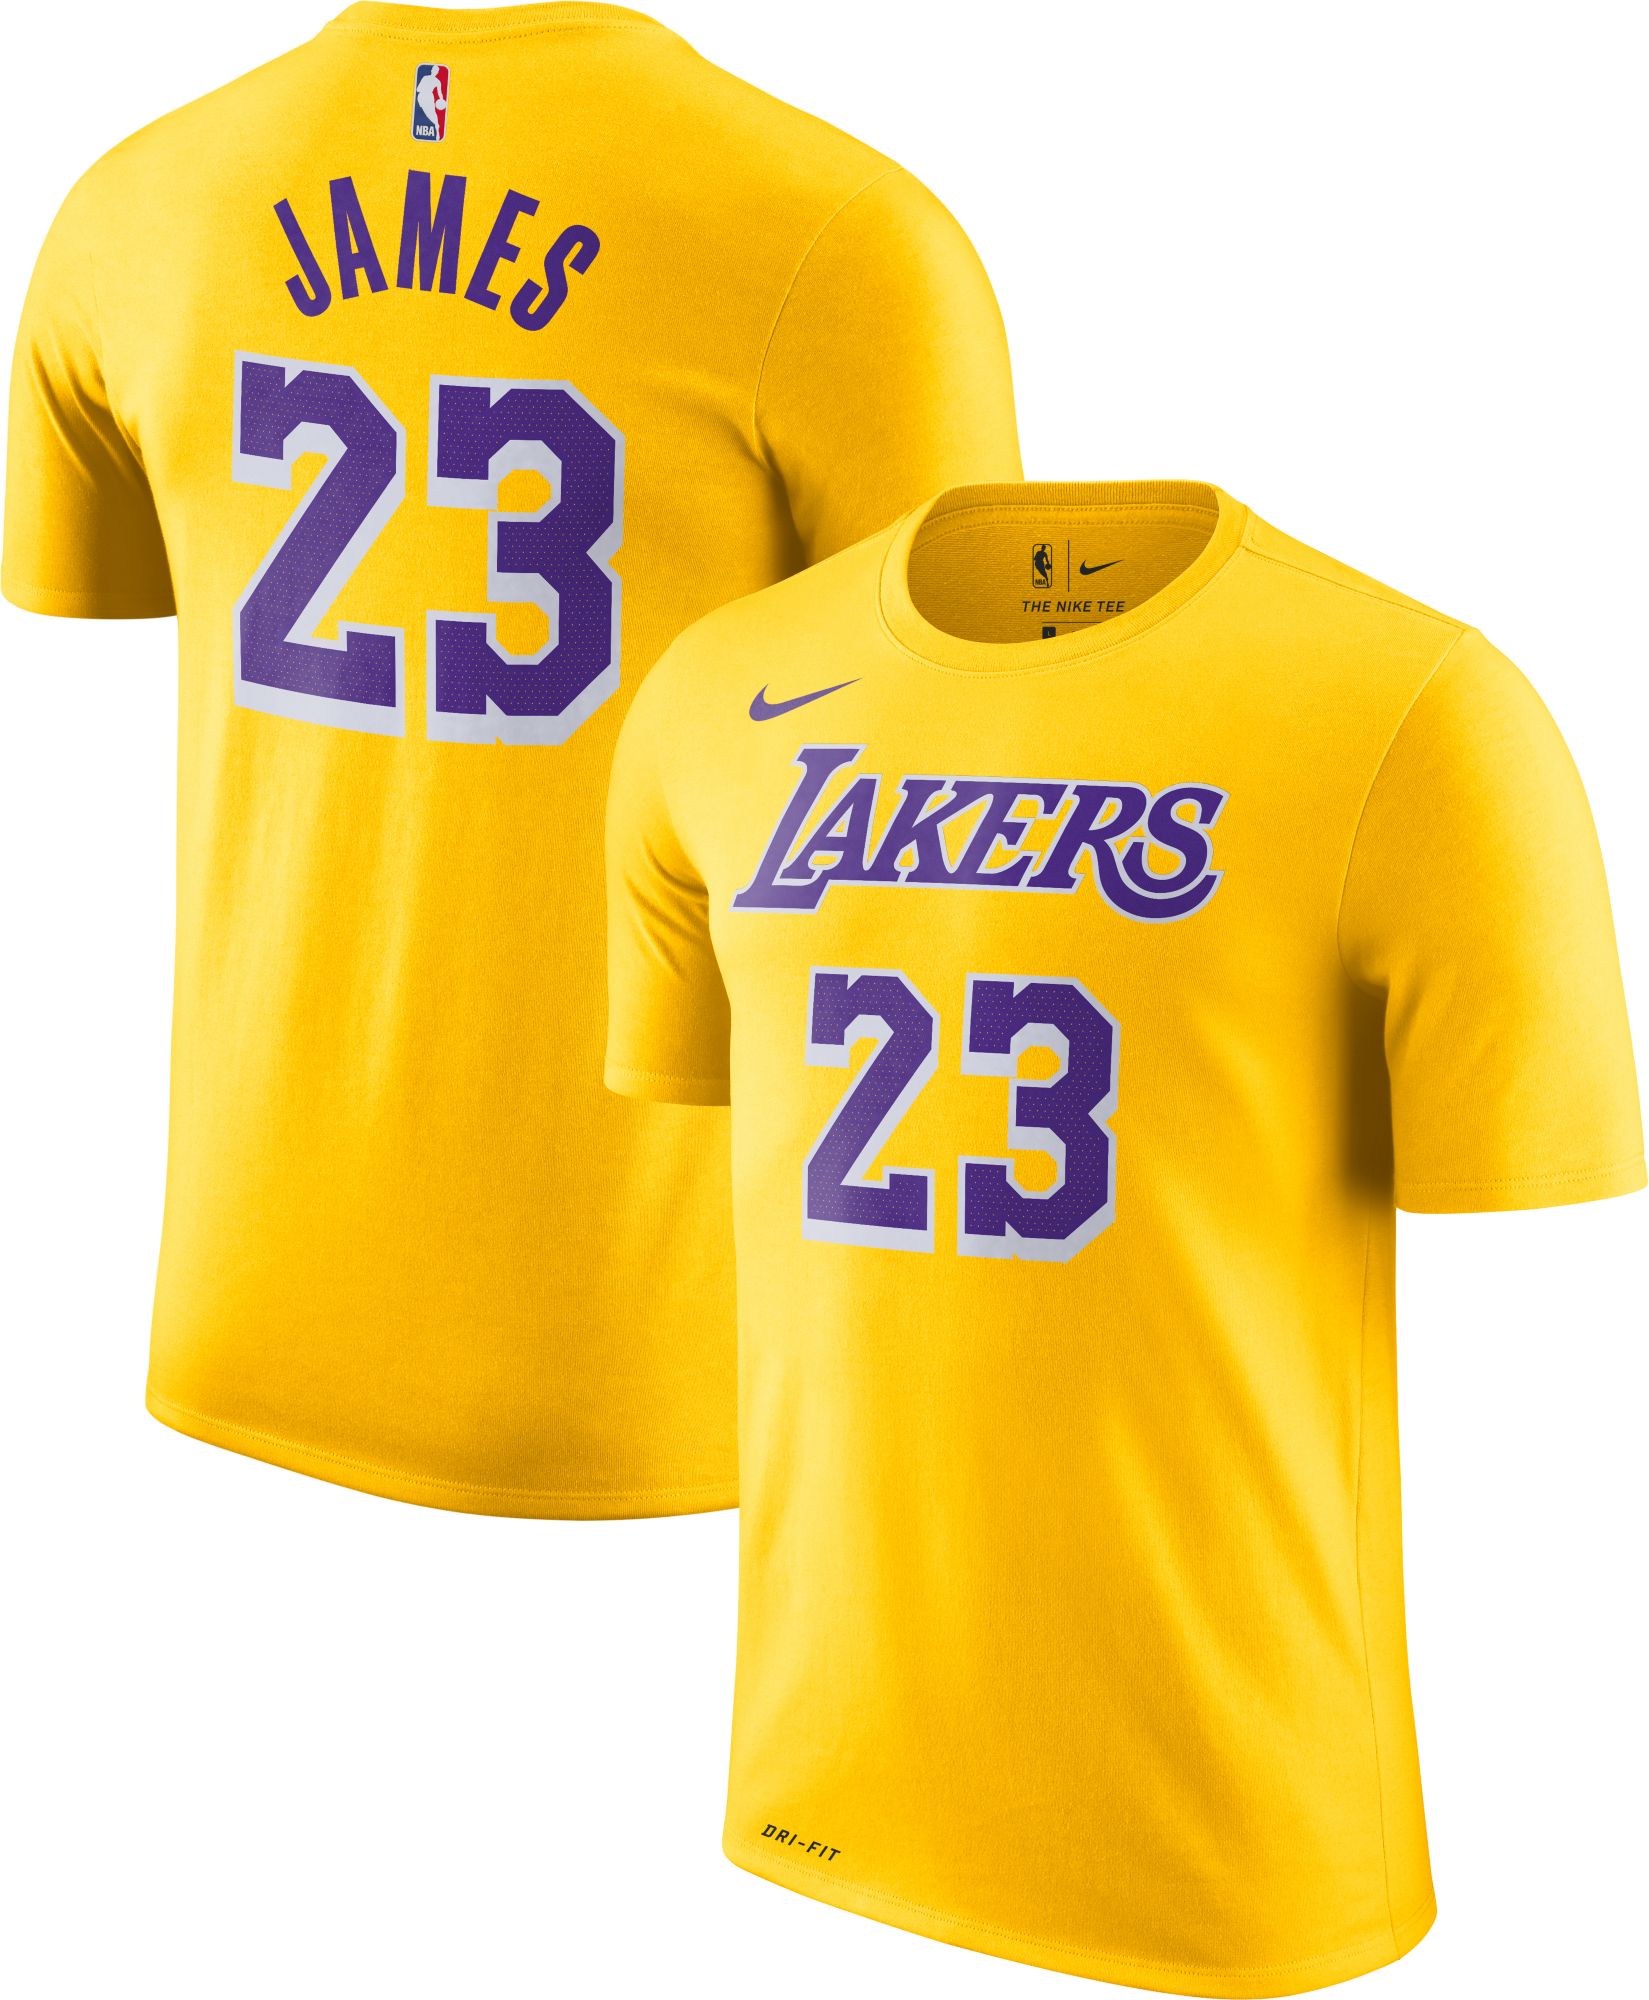 lebron james lakers jersey real